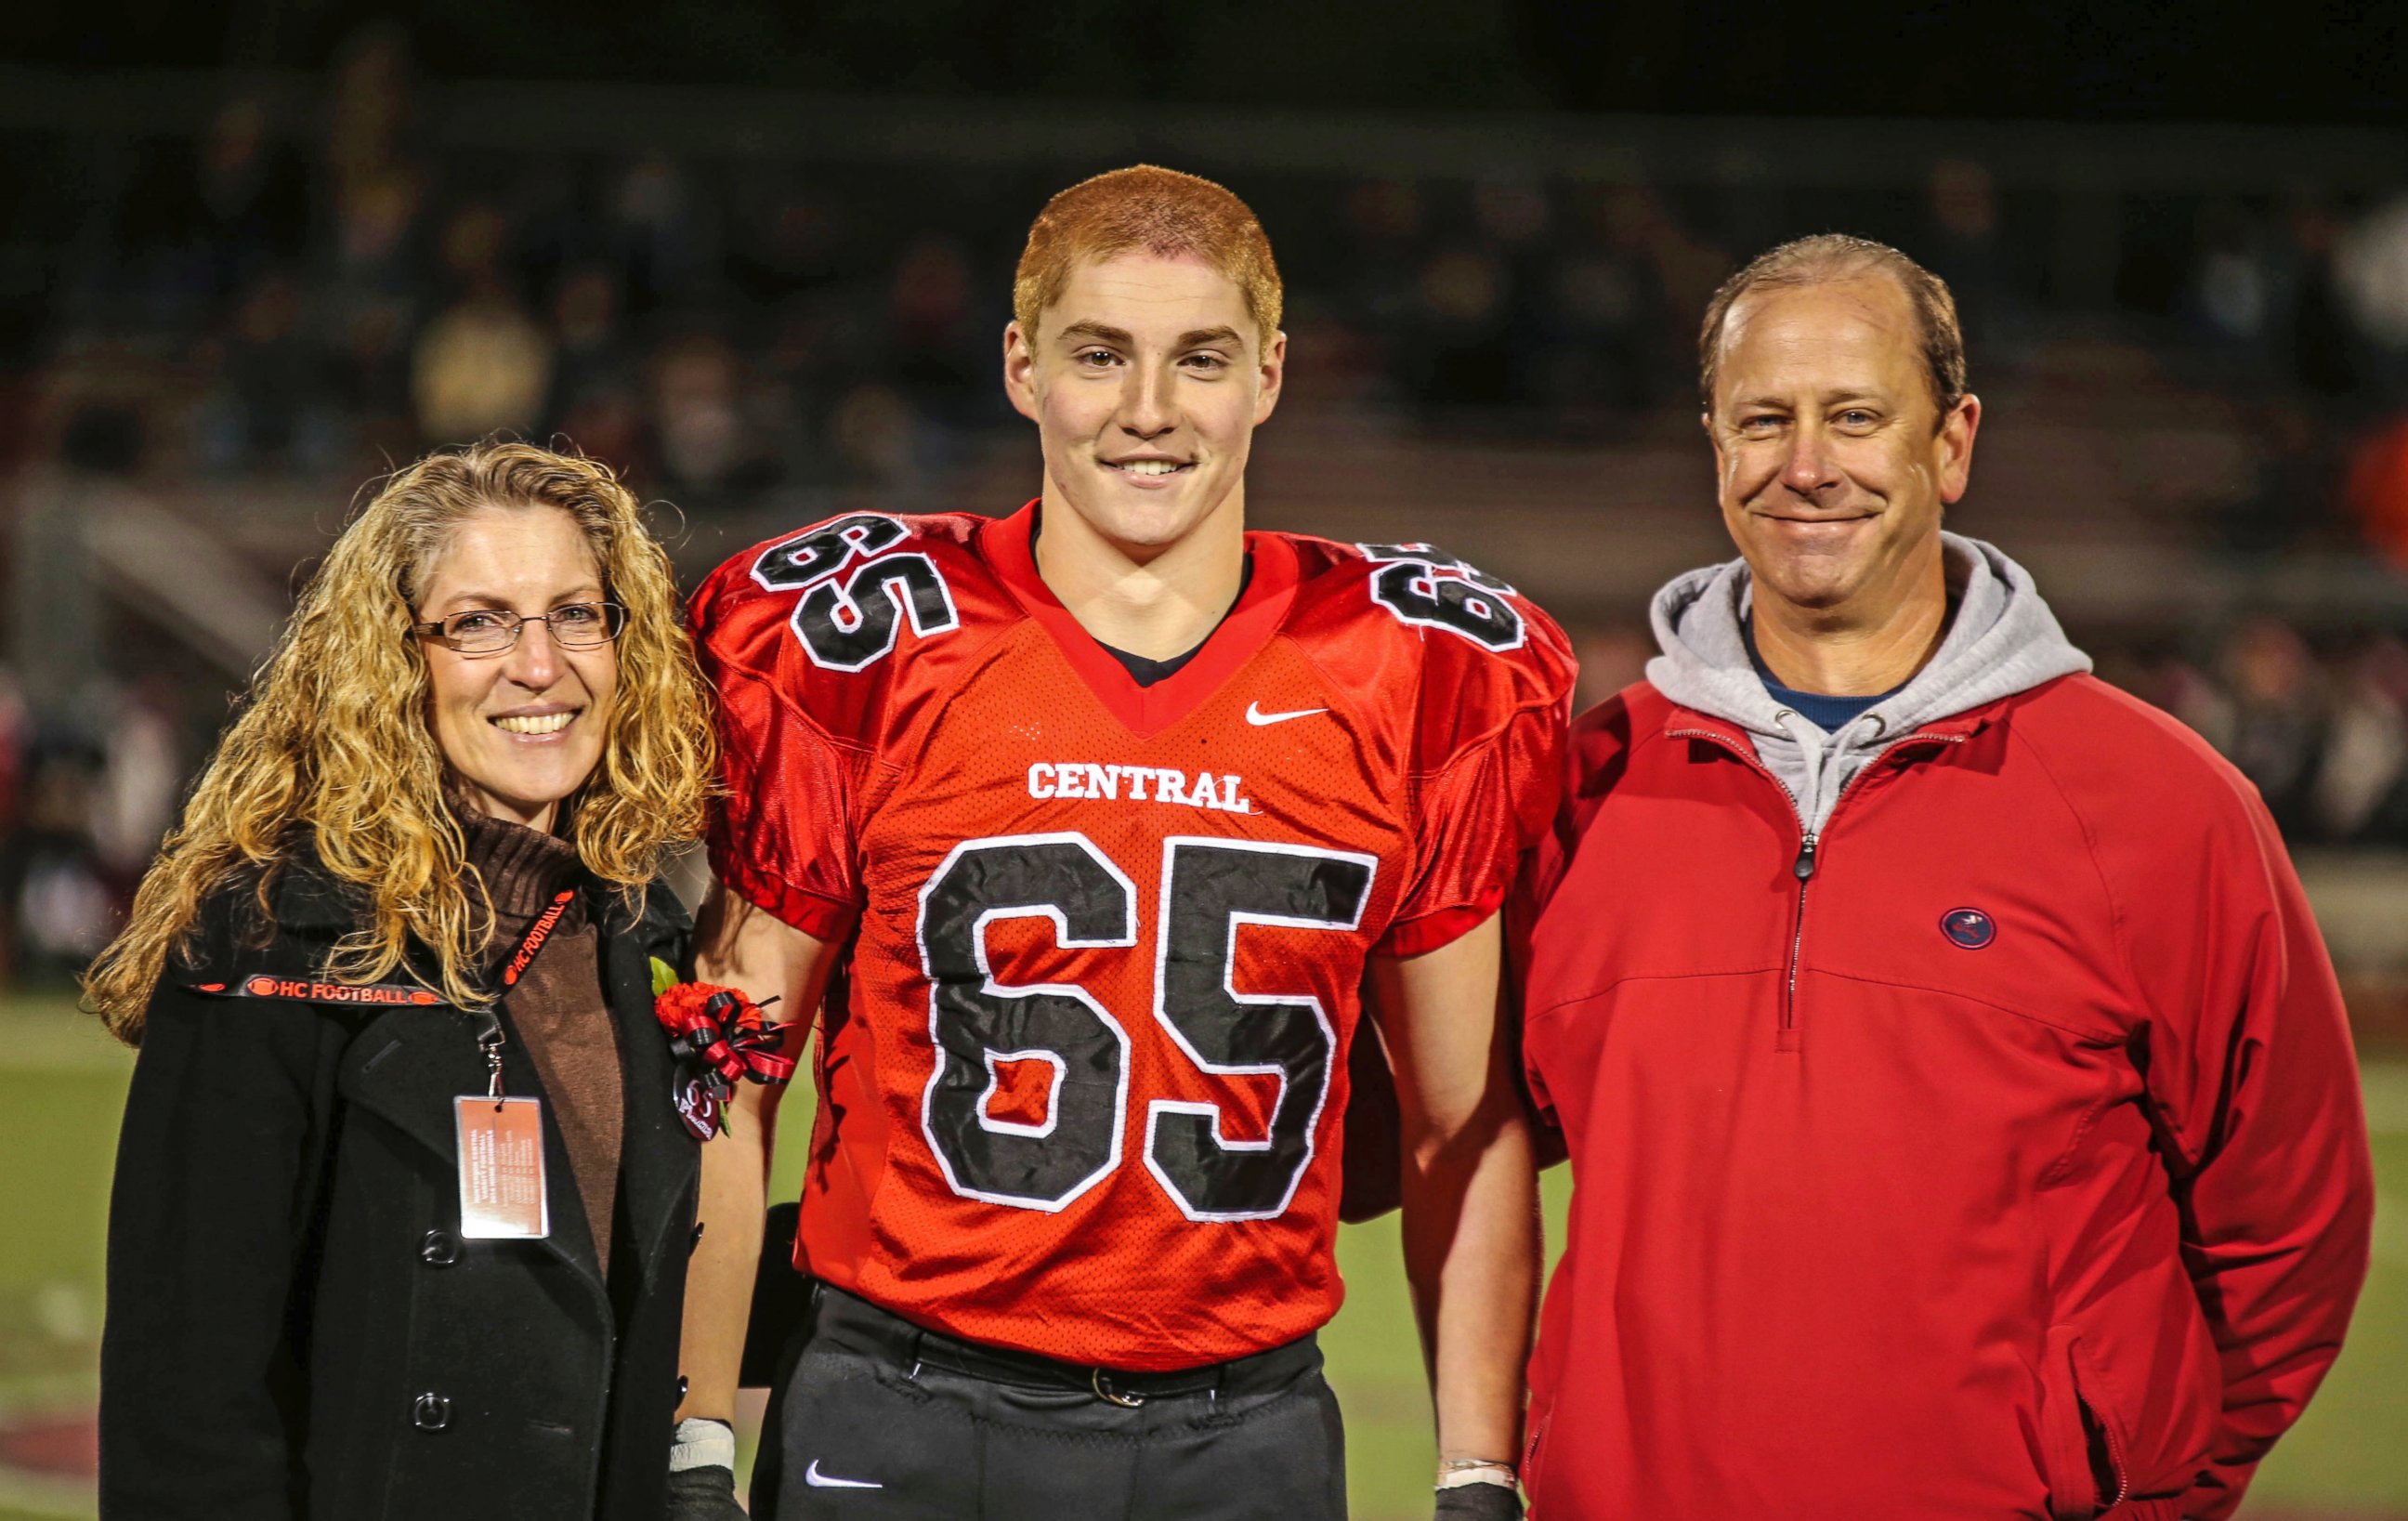 PHOTO: This Oct. 31, 2014 photo shows Timothy Piazza, center, with his parents Evelyn Piazza, left, and James Piazza, right, during Hunterdon Central Regional High School football's "Senior Night" at the high school's stadium in Flemington, N.J. 